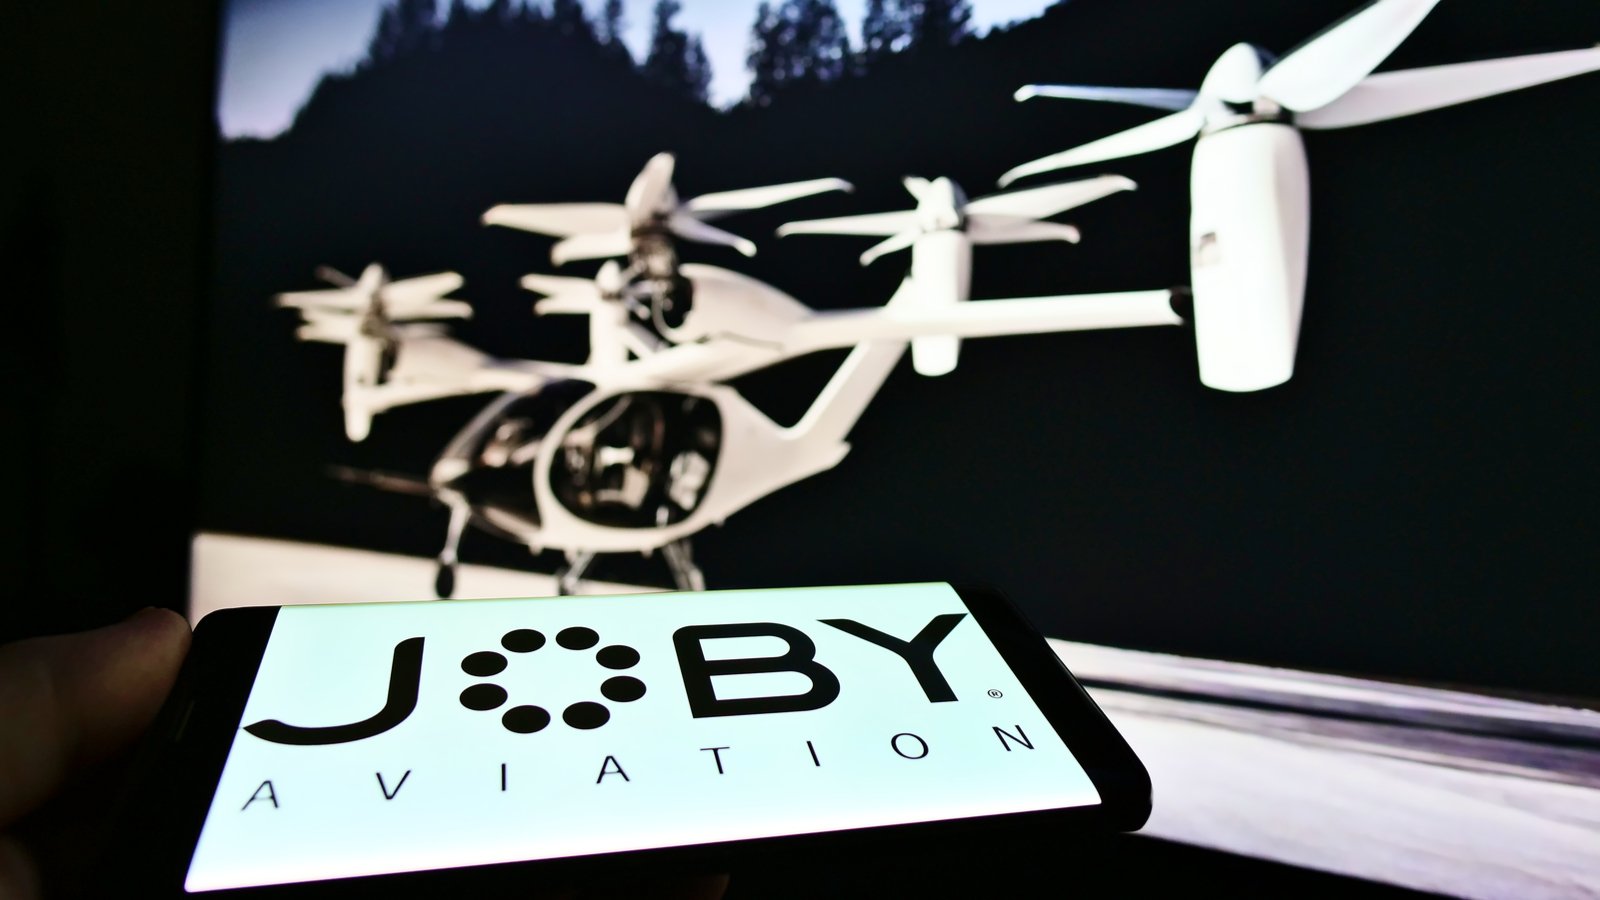 Joby Aviation: Pioneering the Air-Taxi Future or Just Another Meme Stock?